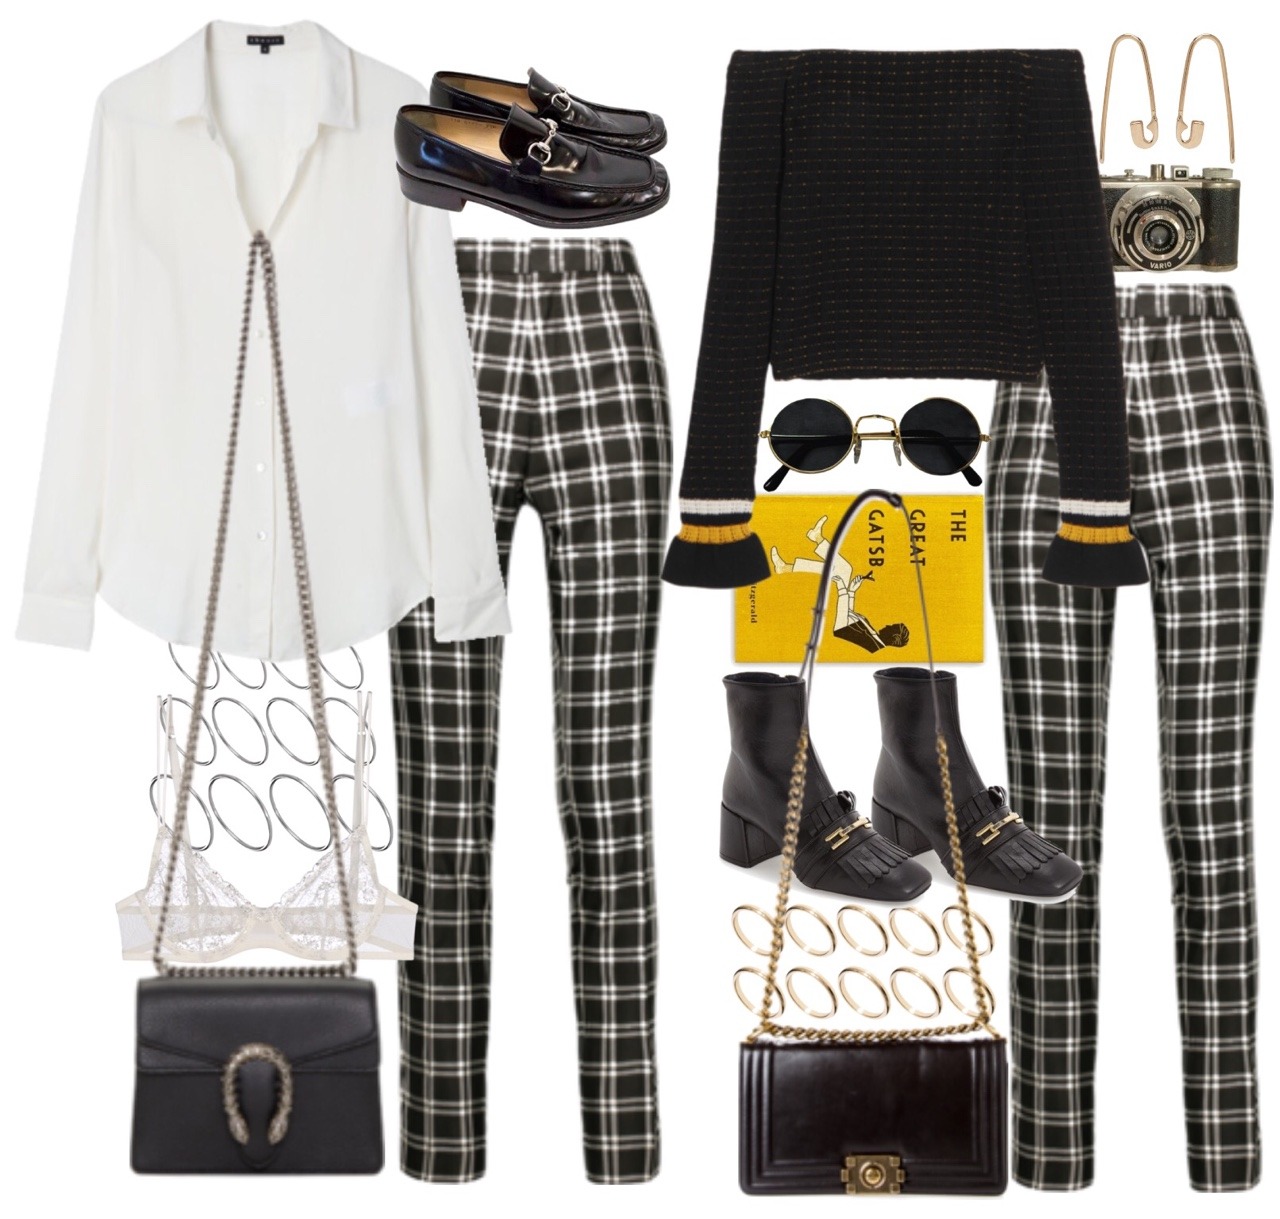 Harry's Clothes, How to style black and white plaid pants...